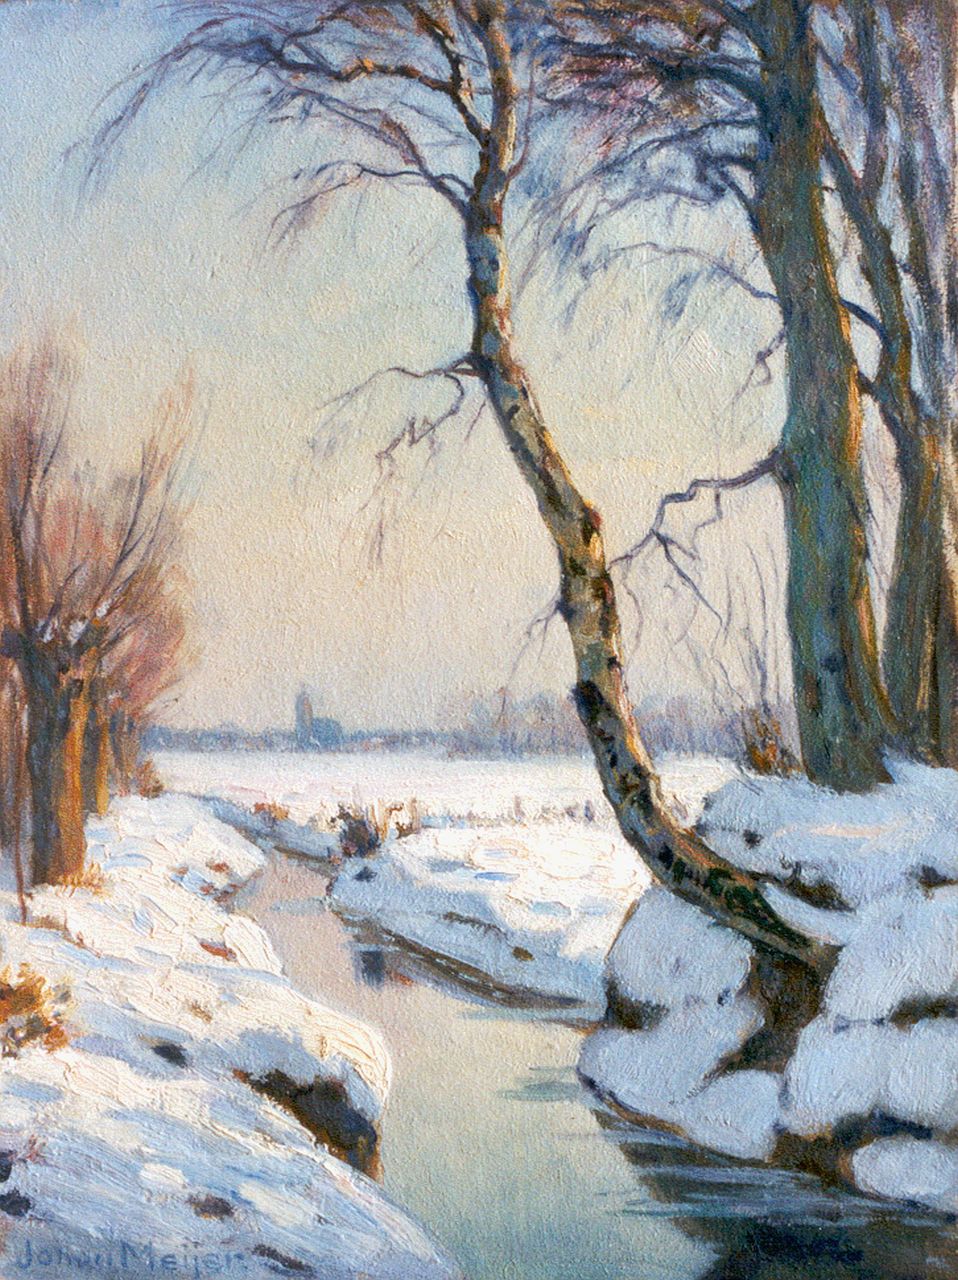 Meijer J.  | Johannes 'Johan' Meijer, A snow-covered landscape, oil on panel 32.2 x 24.1 cm, signed l.l. and on the reverse